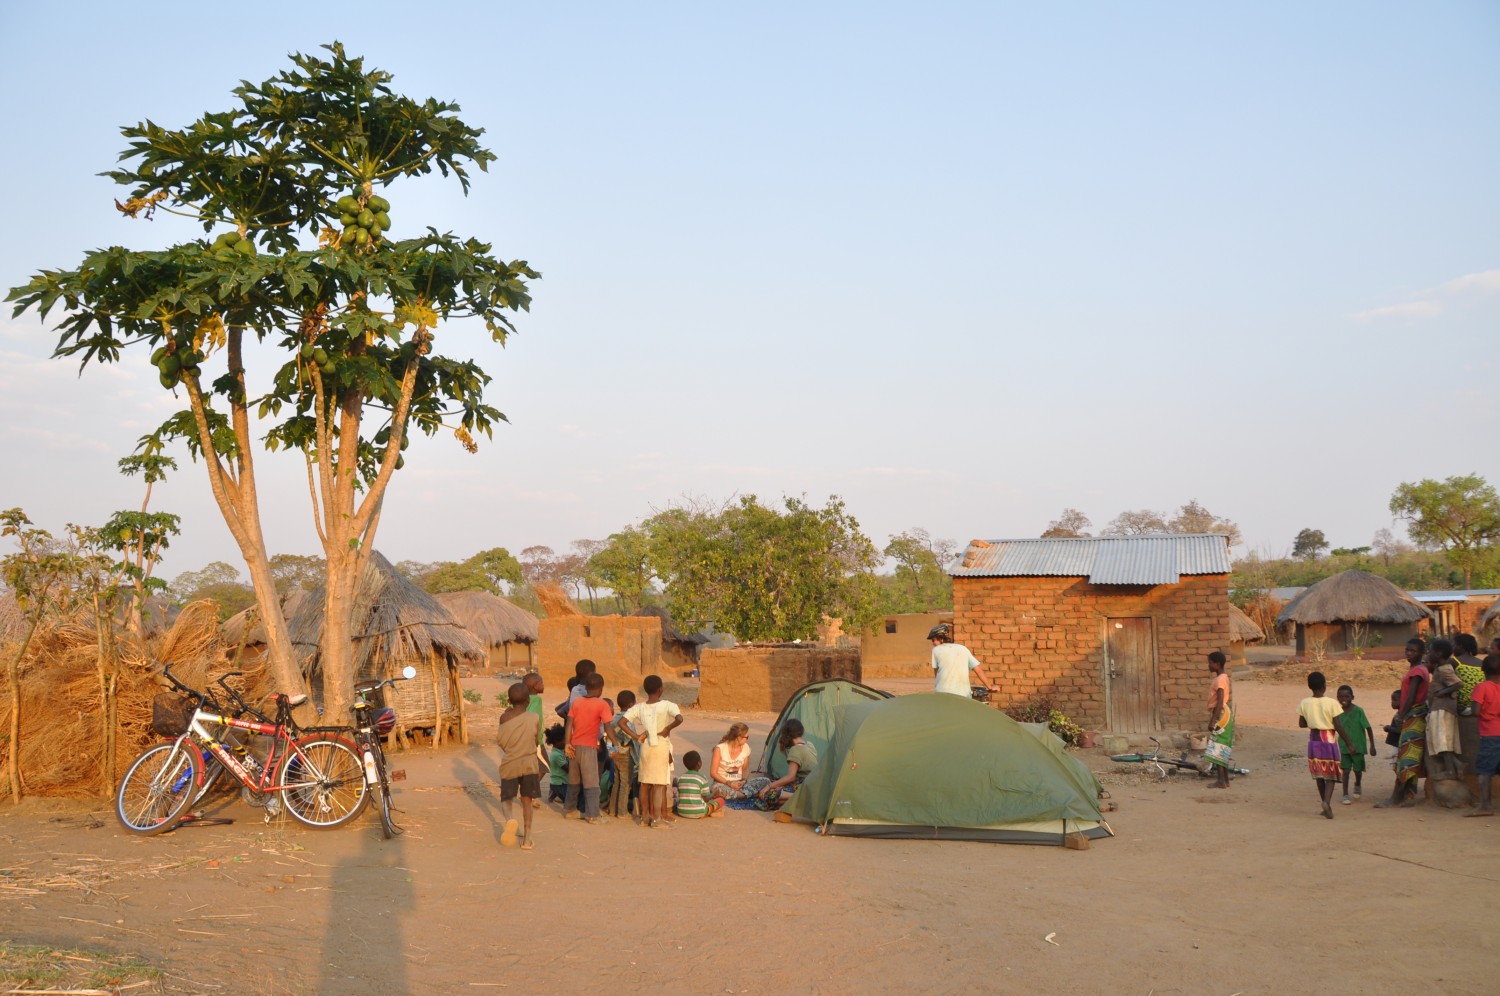 Our tents in Shisanti village